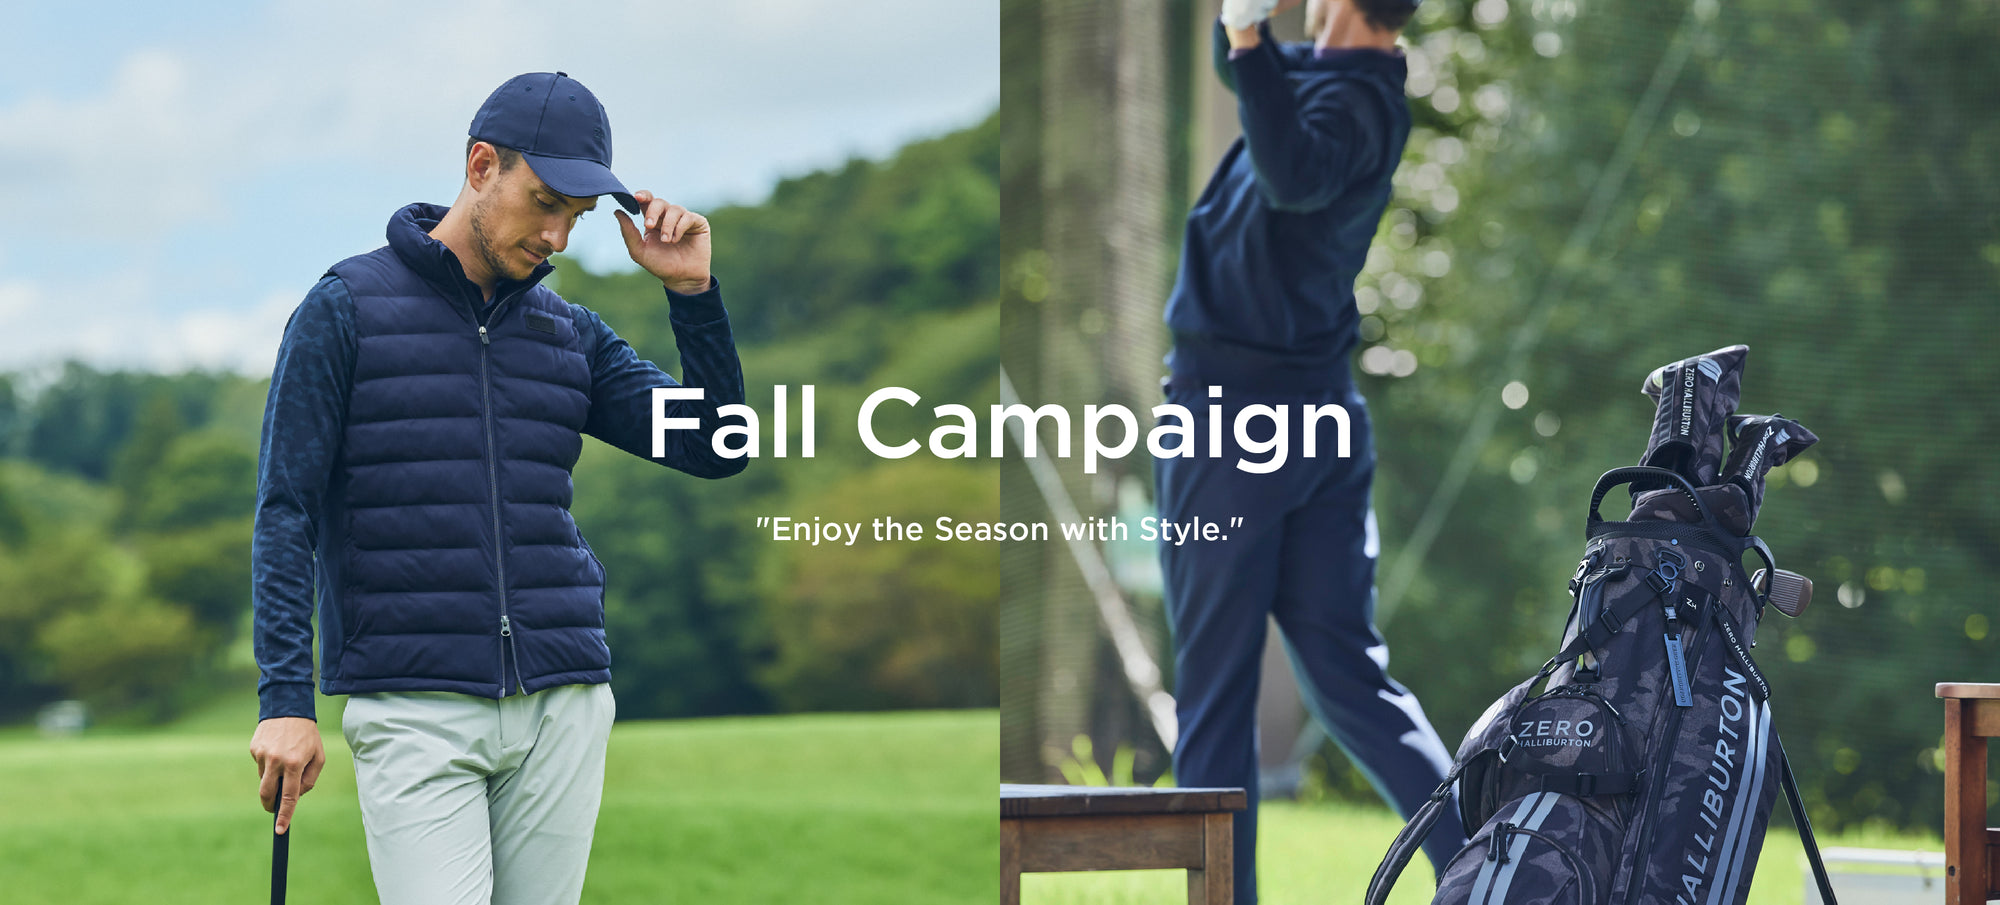 GOLF COLLECTION ｜対象キャディバッグ購入でキャップをプレゼント＜Fall Campaign＞9/23～10/31開催